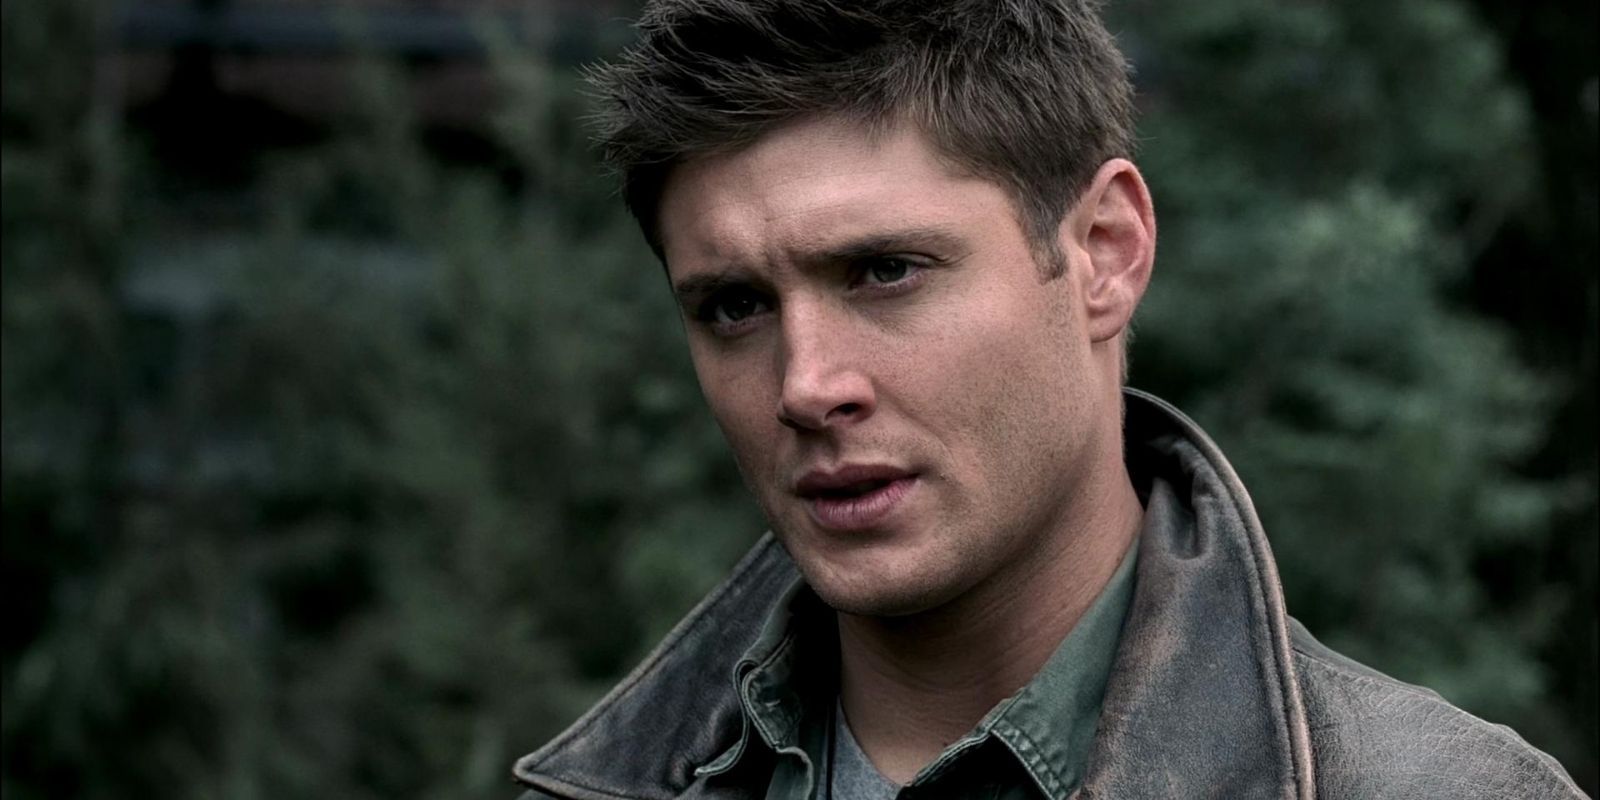 Jensen Ackles Has A Supernatural Resurrection Pitch For Hbo Max